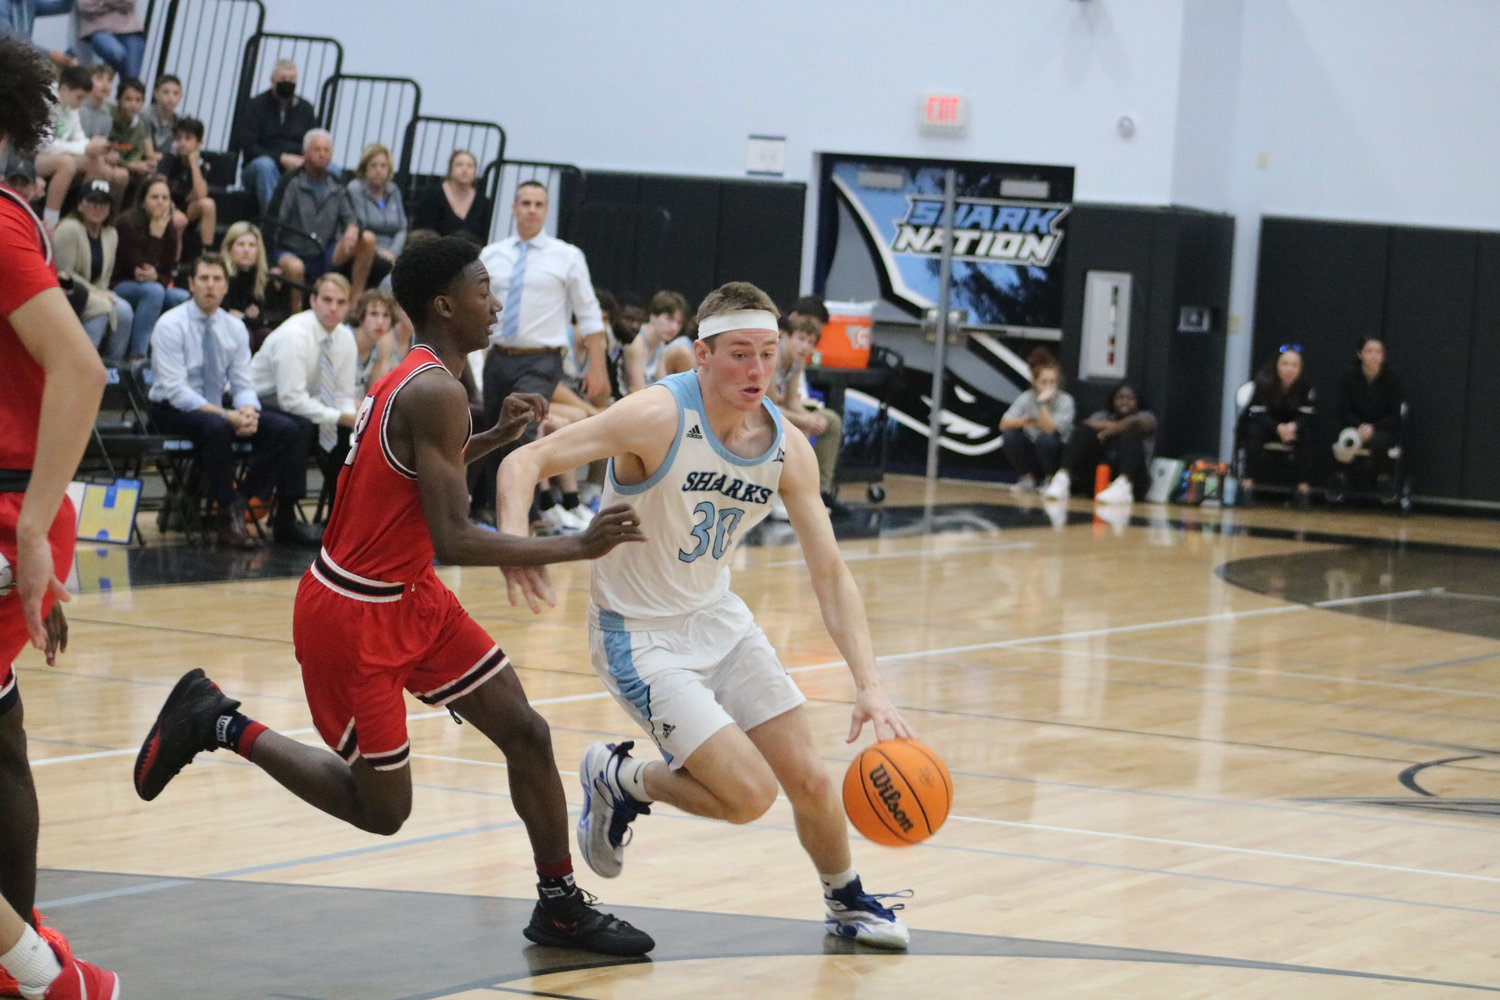 Ross Candelino drives to the basket during the regional semifinals Feb. 22. He led the Sharks with 19 points.